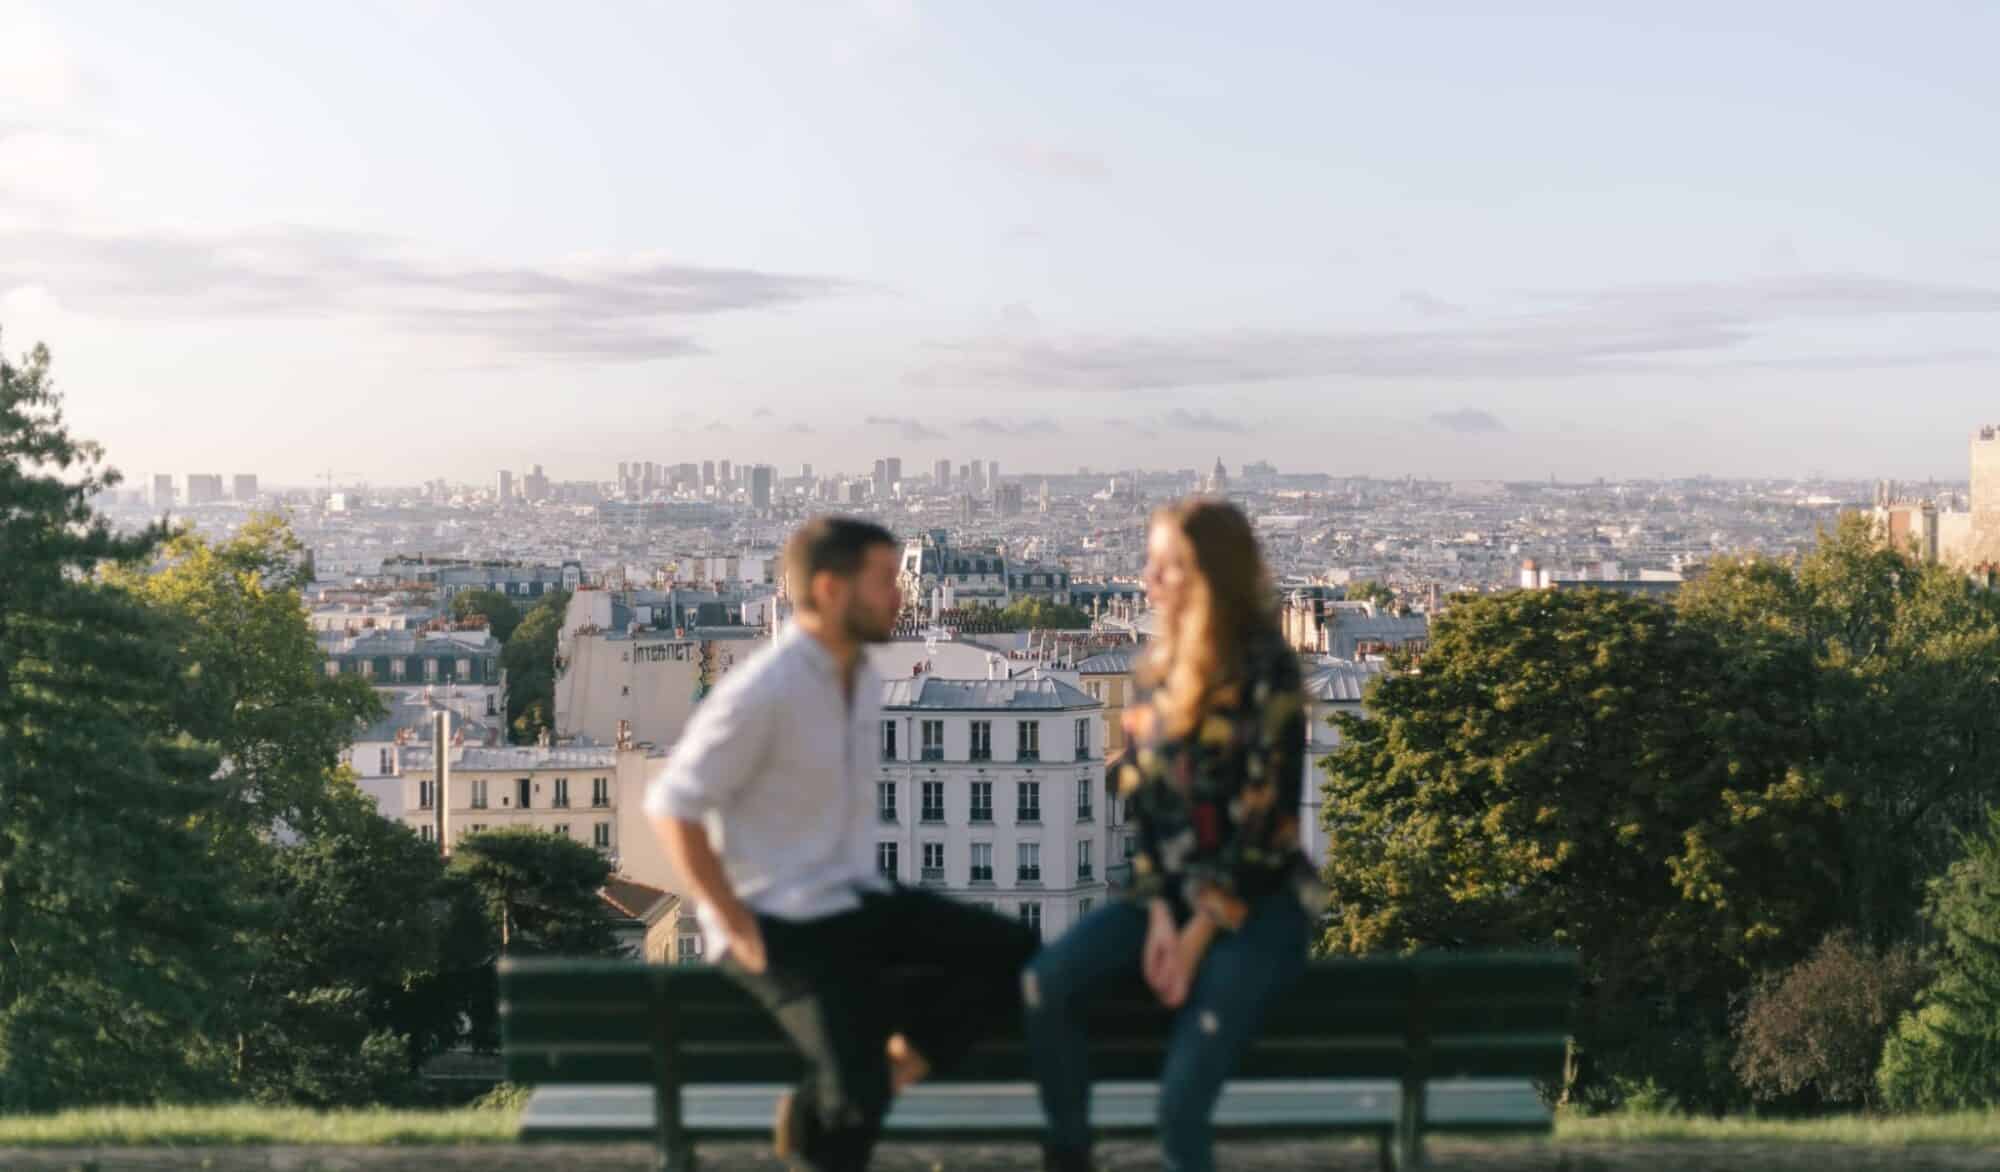 A couple sit speaking with panaromic views of Paris in the back ground.